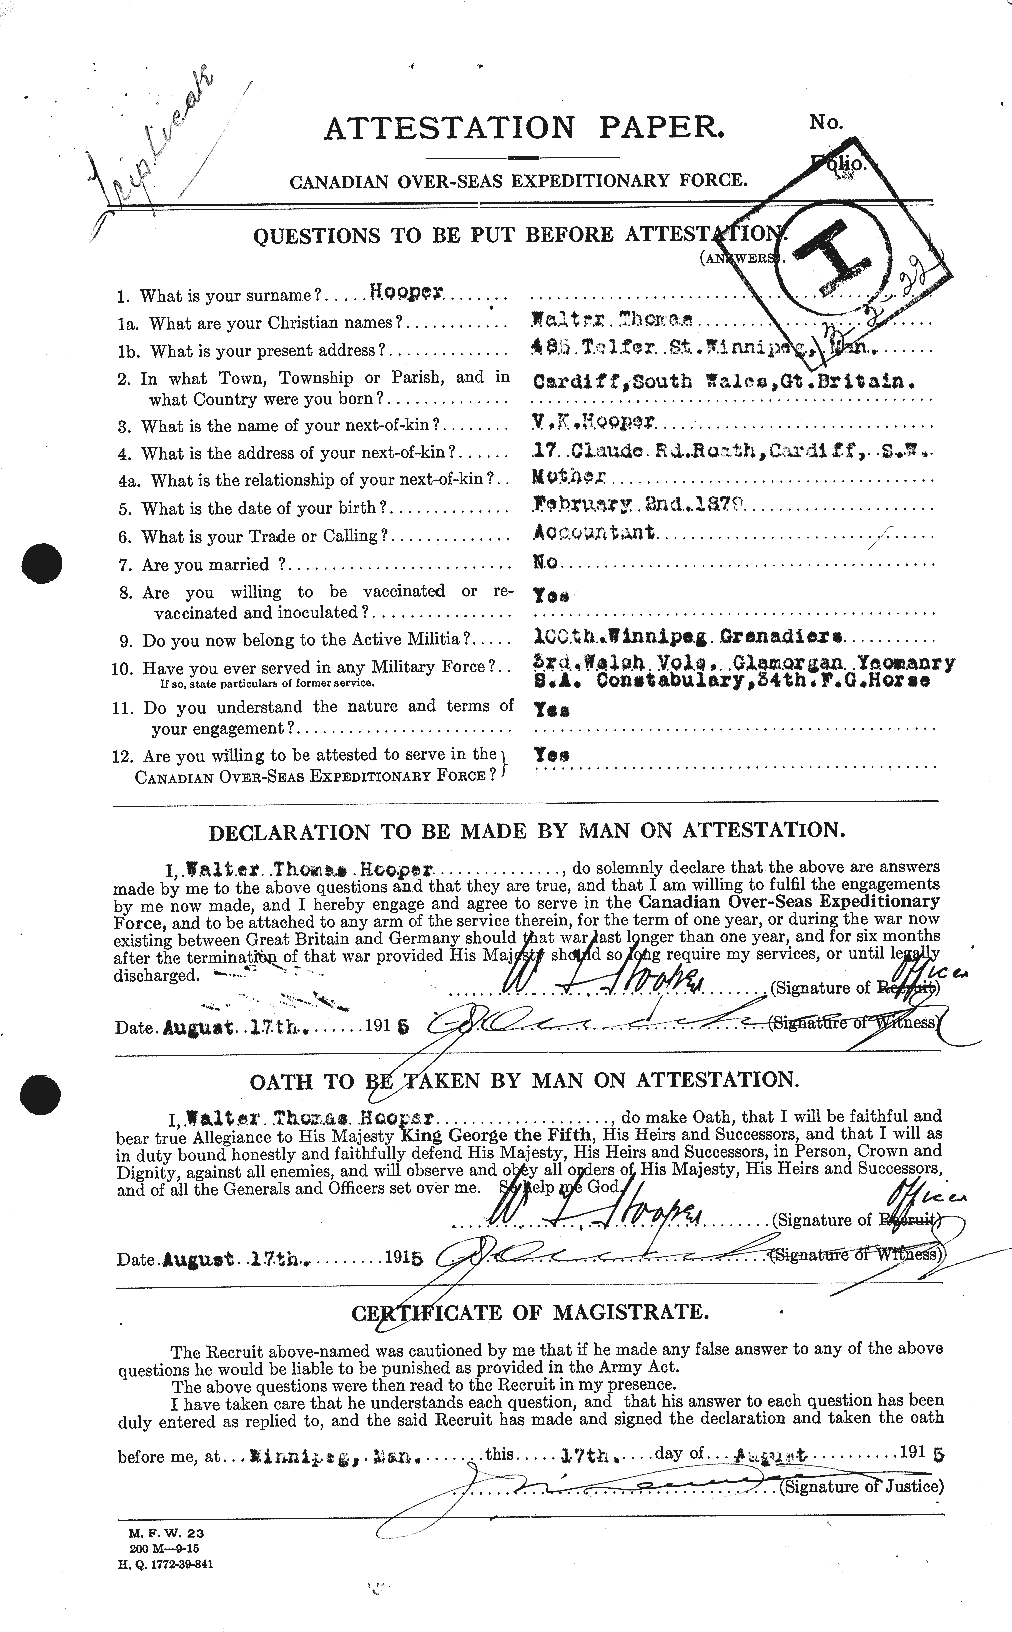 Personnel Records of the First World War - CEF 399217a